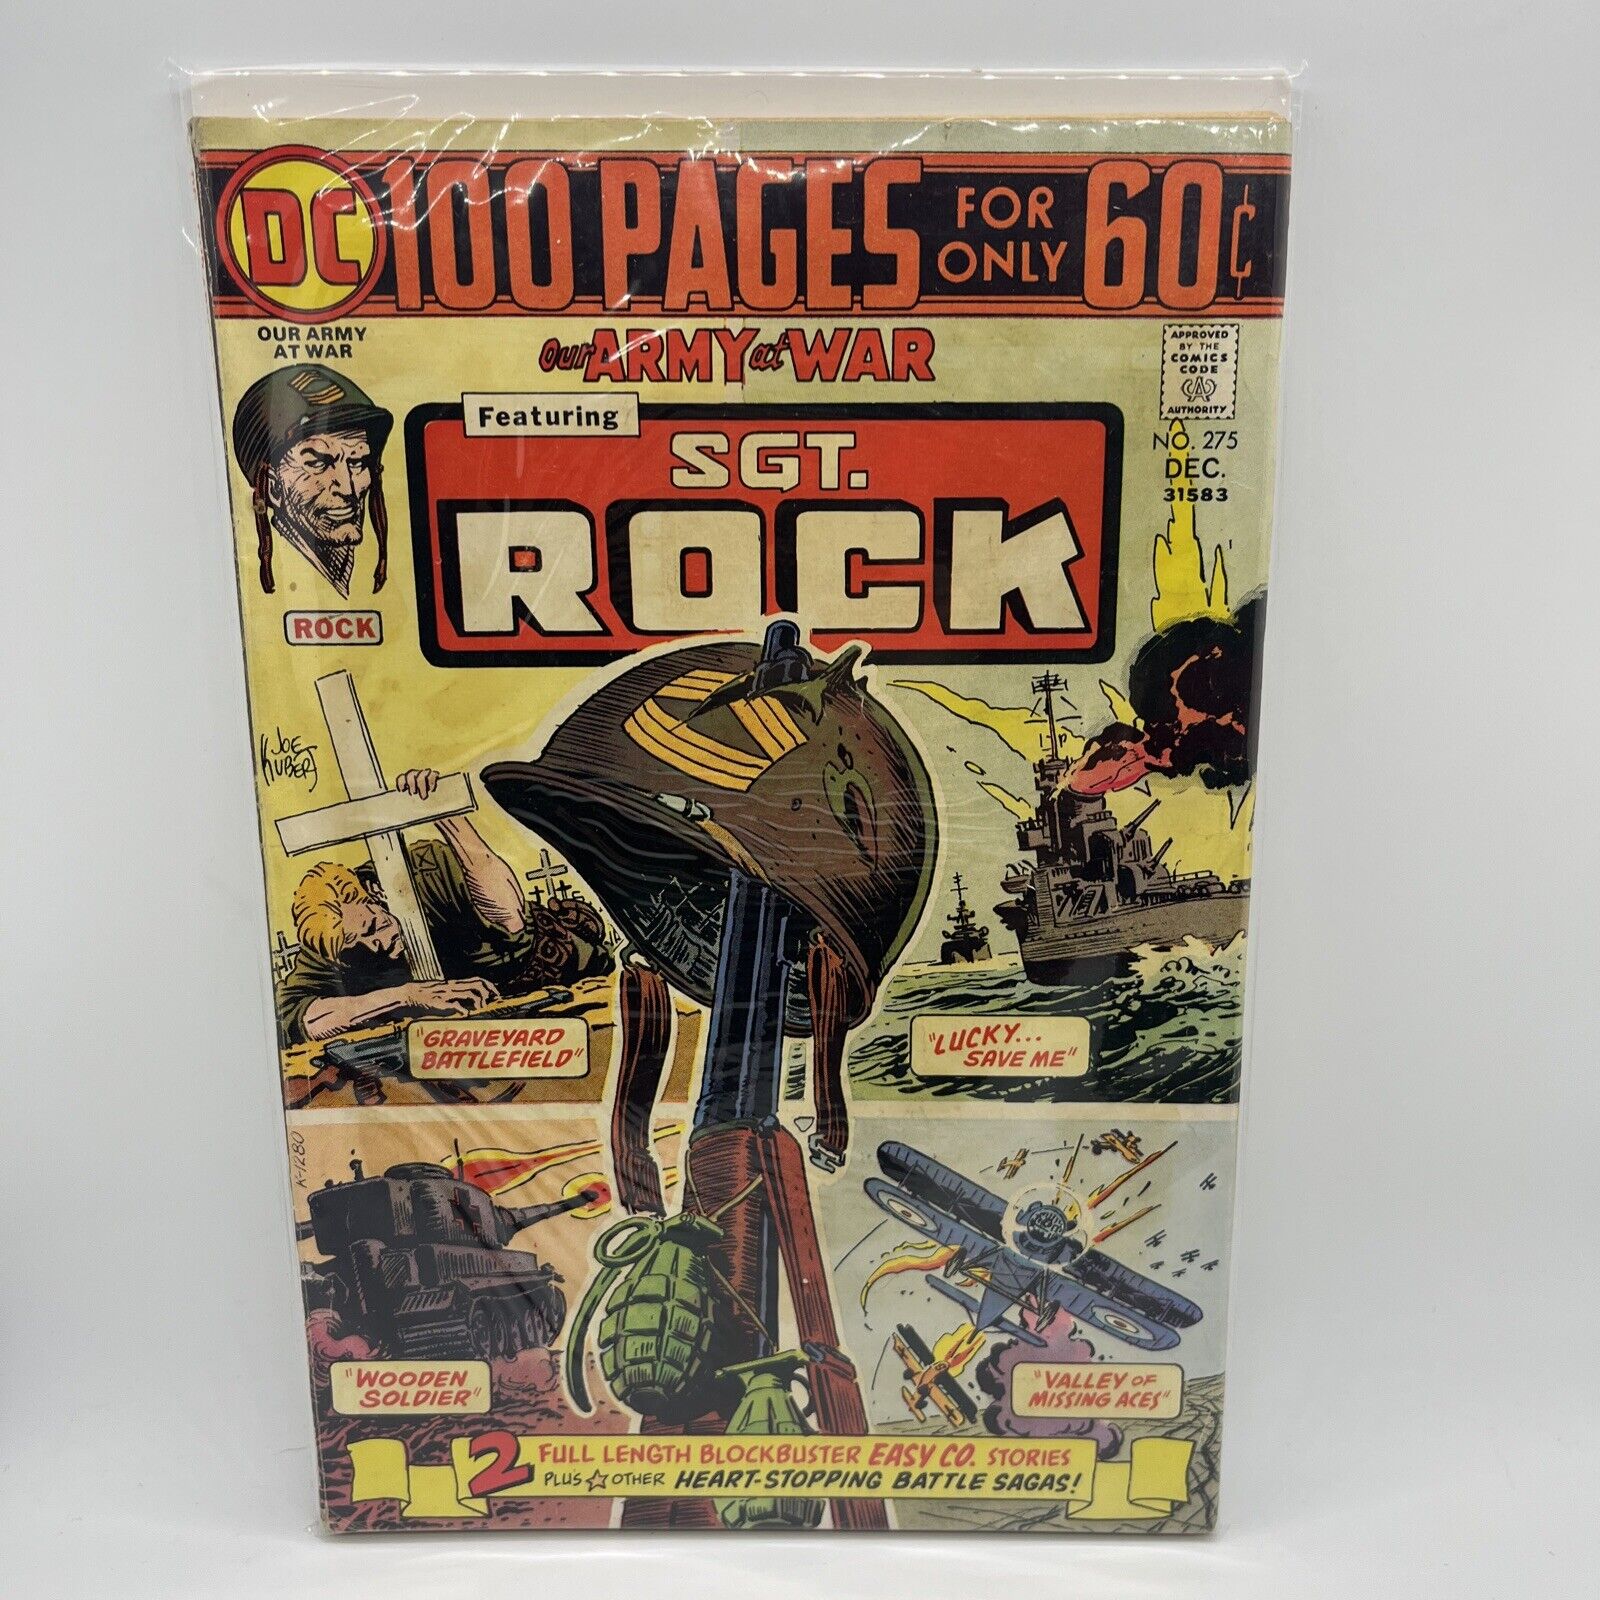 DC: OUR ARMY AT WAR FEATURING SGT. ROCK #275 100 PAGES GIANT 1974 J